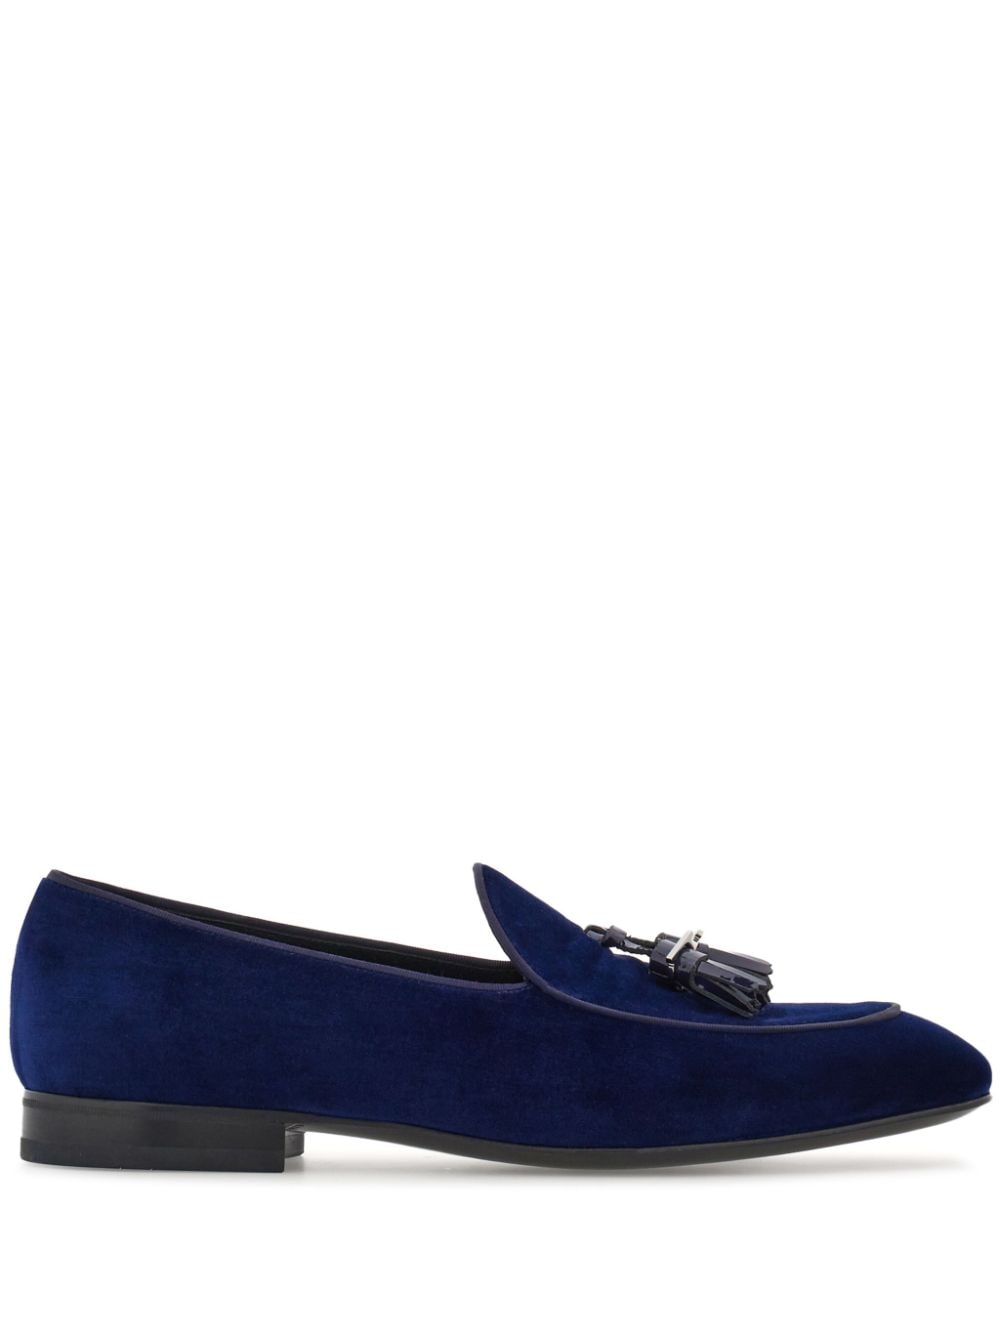 Ferragamo Loafer With Tassels In Oxford Blue